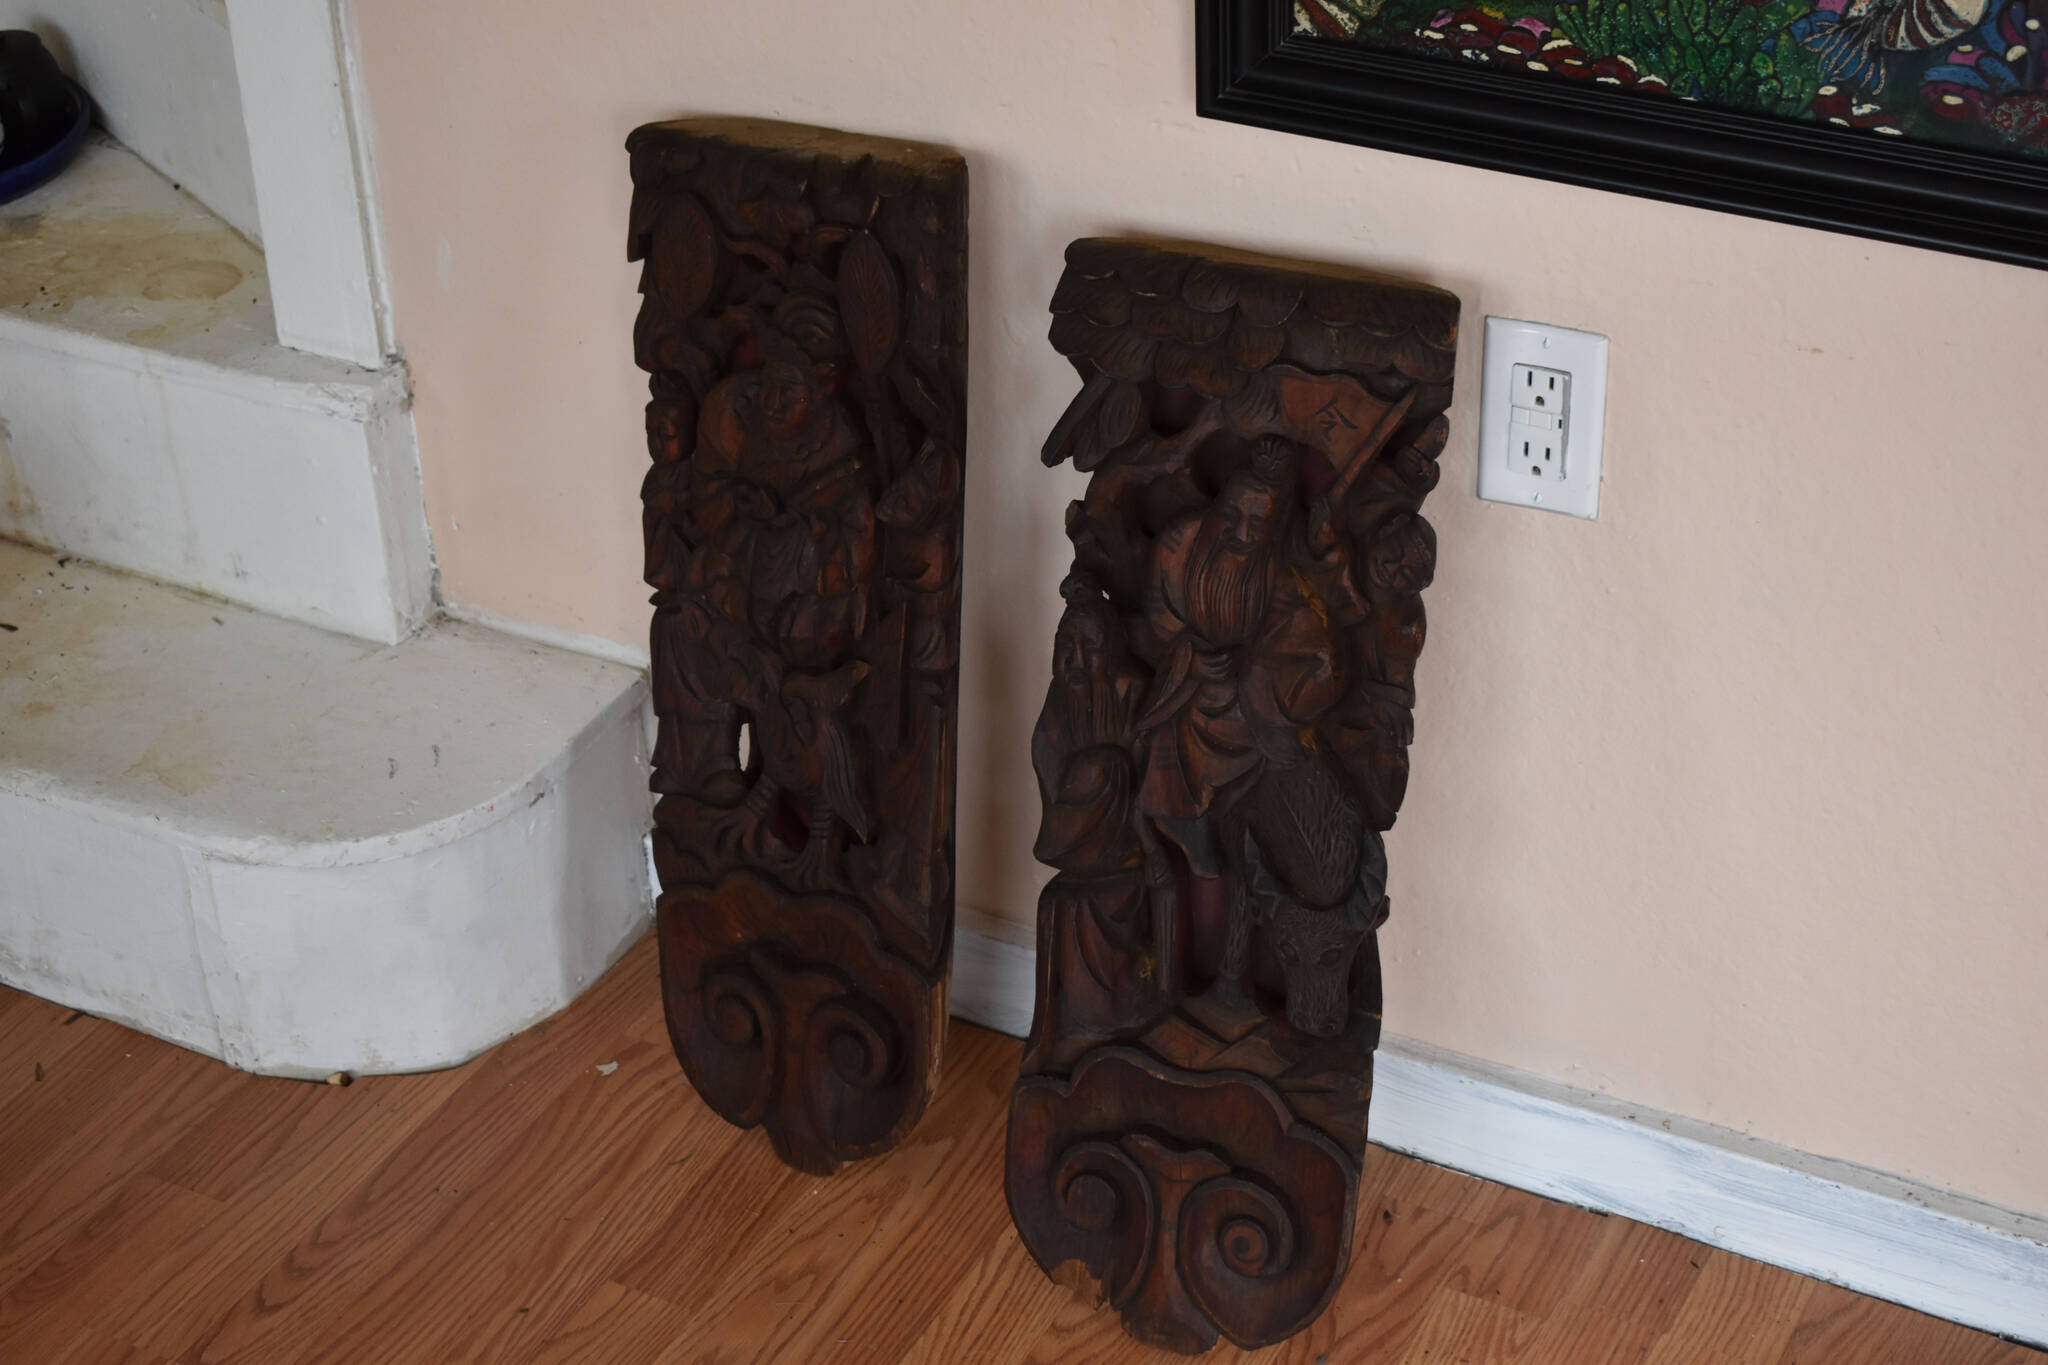 Two 300-year-old carvings are featured in Kathy Matta’s gallery in Soldotna, Alaska, on Wednesday, Sept. 7, 2022. (Jake Dye/Peninsula Clarion)